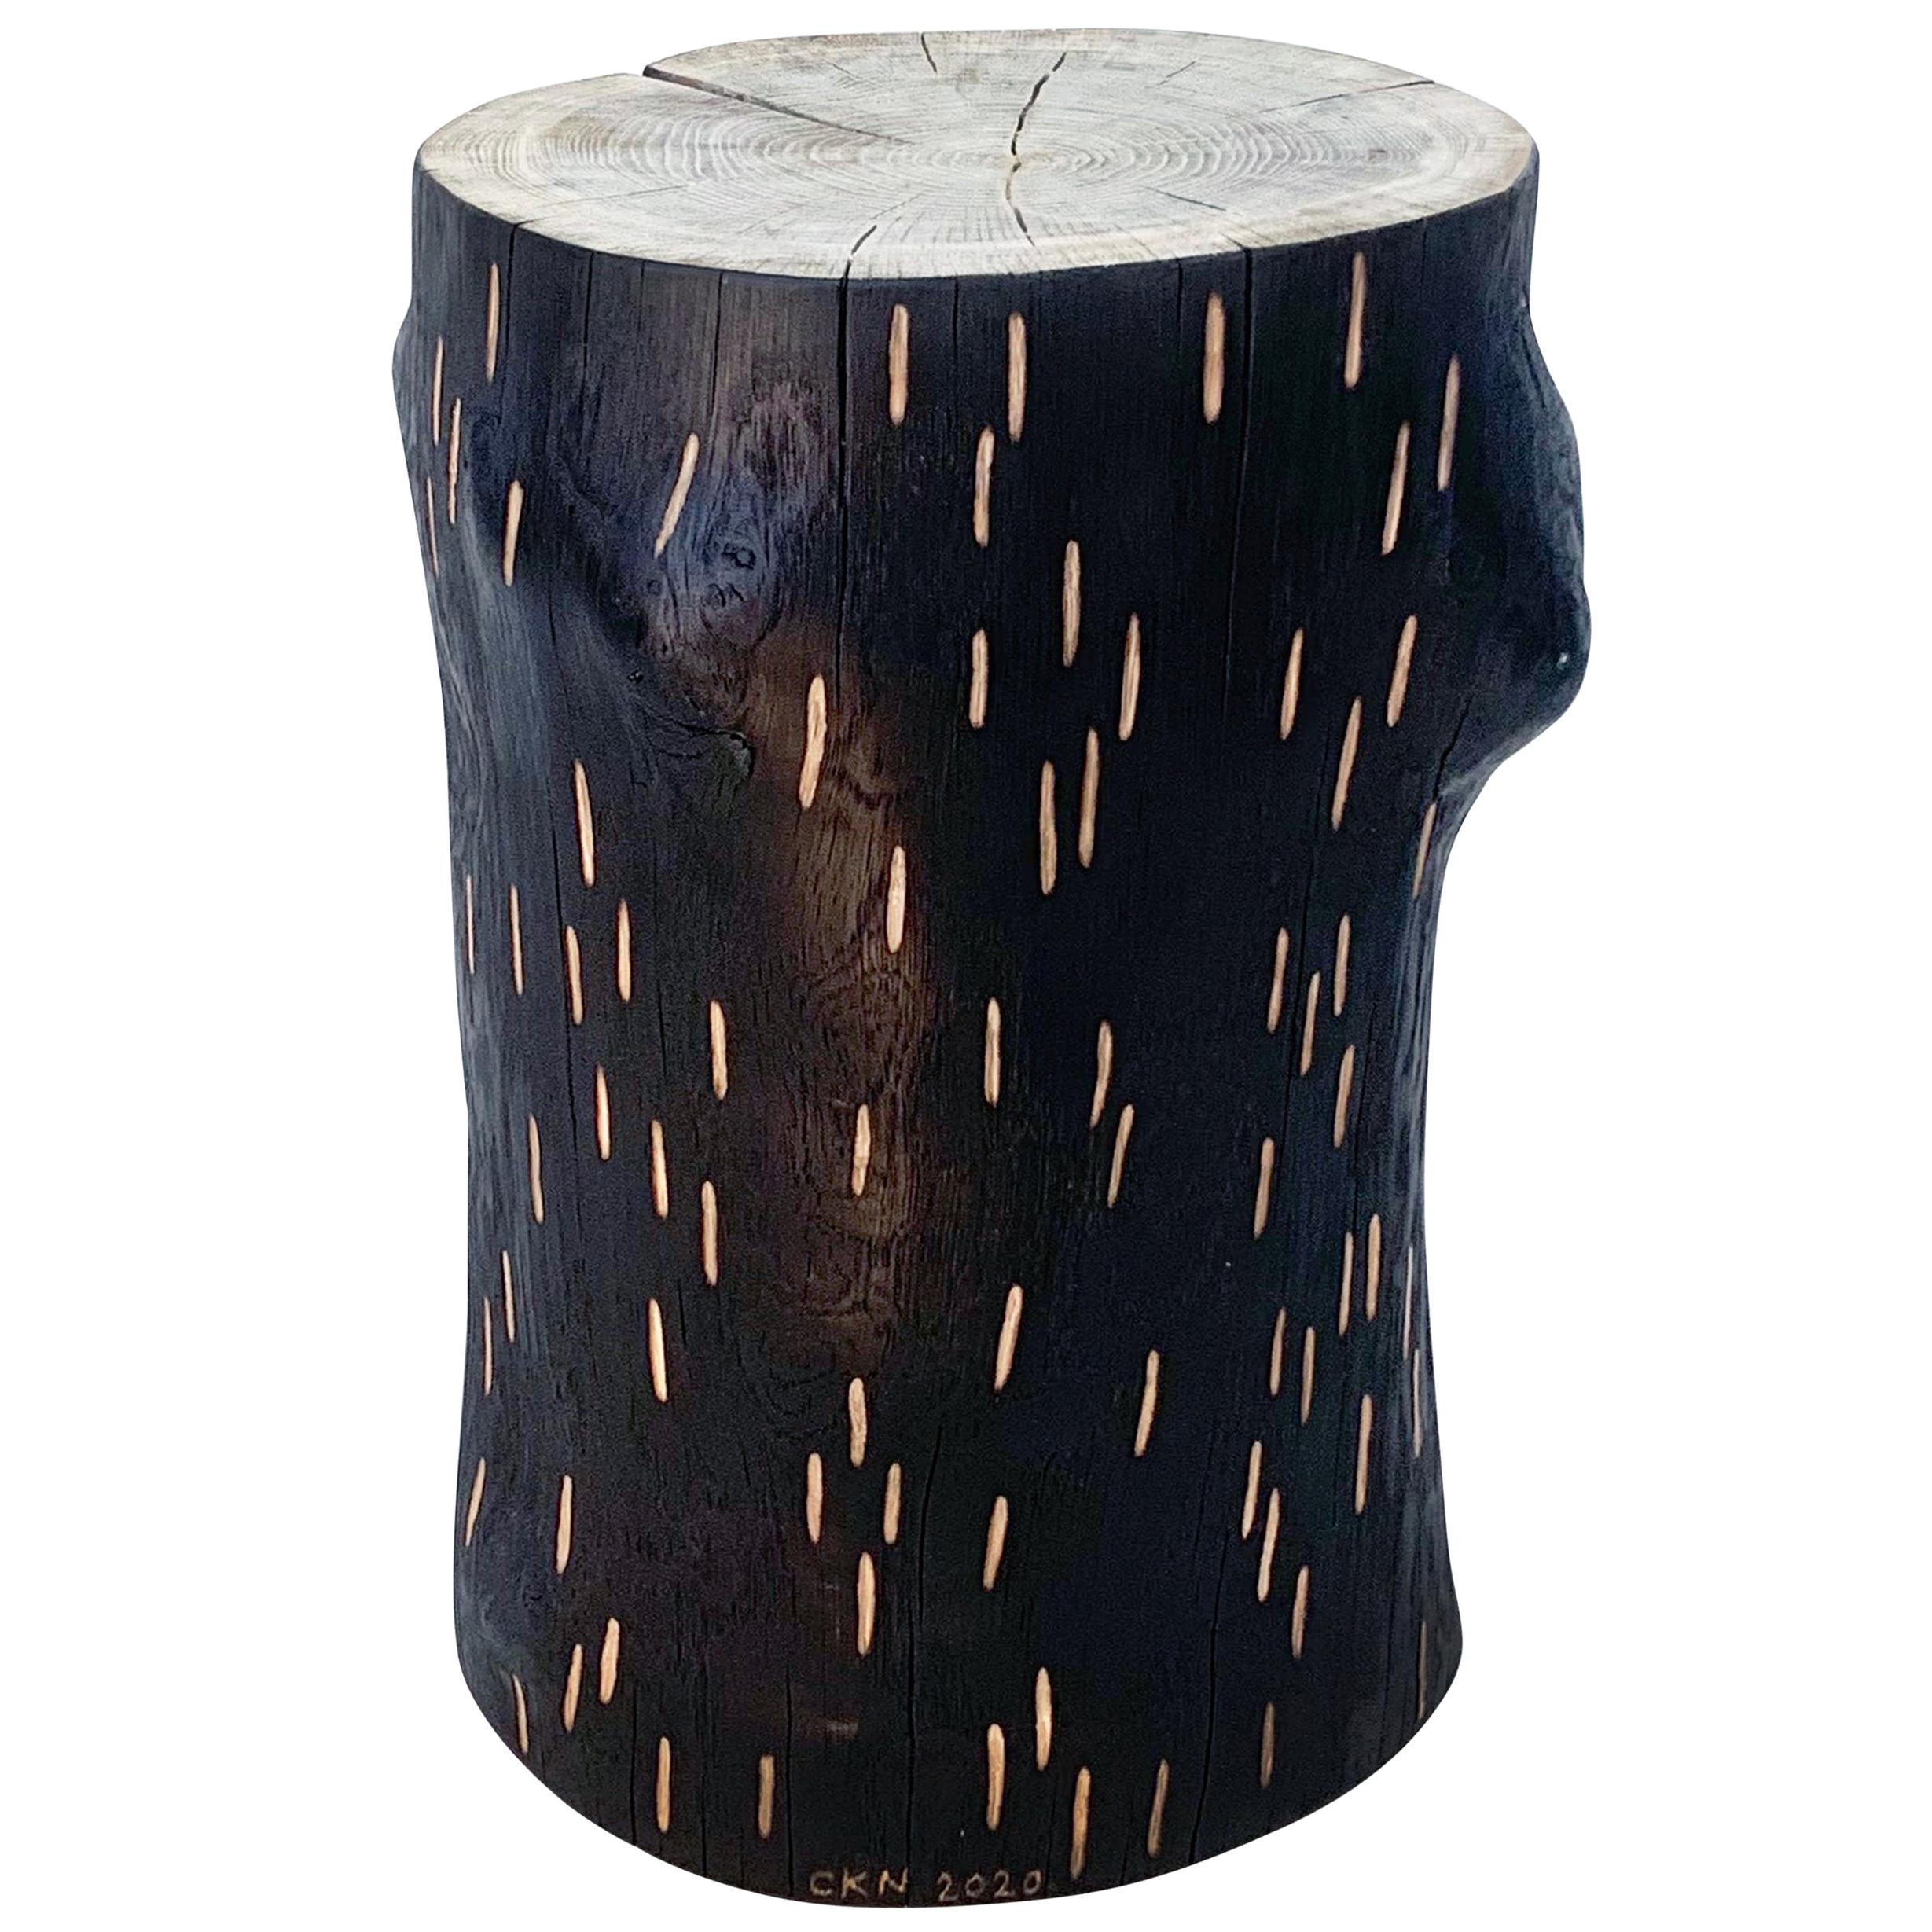 'Barking Up The Wrong Log' charred oak stool with hand carved markings